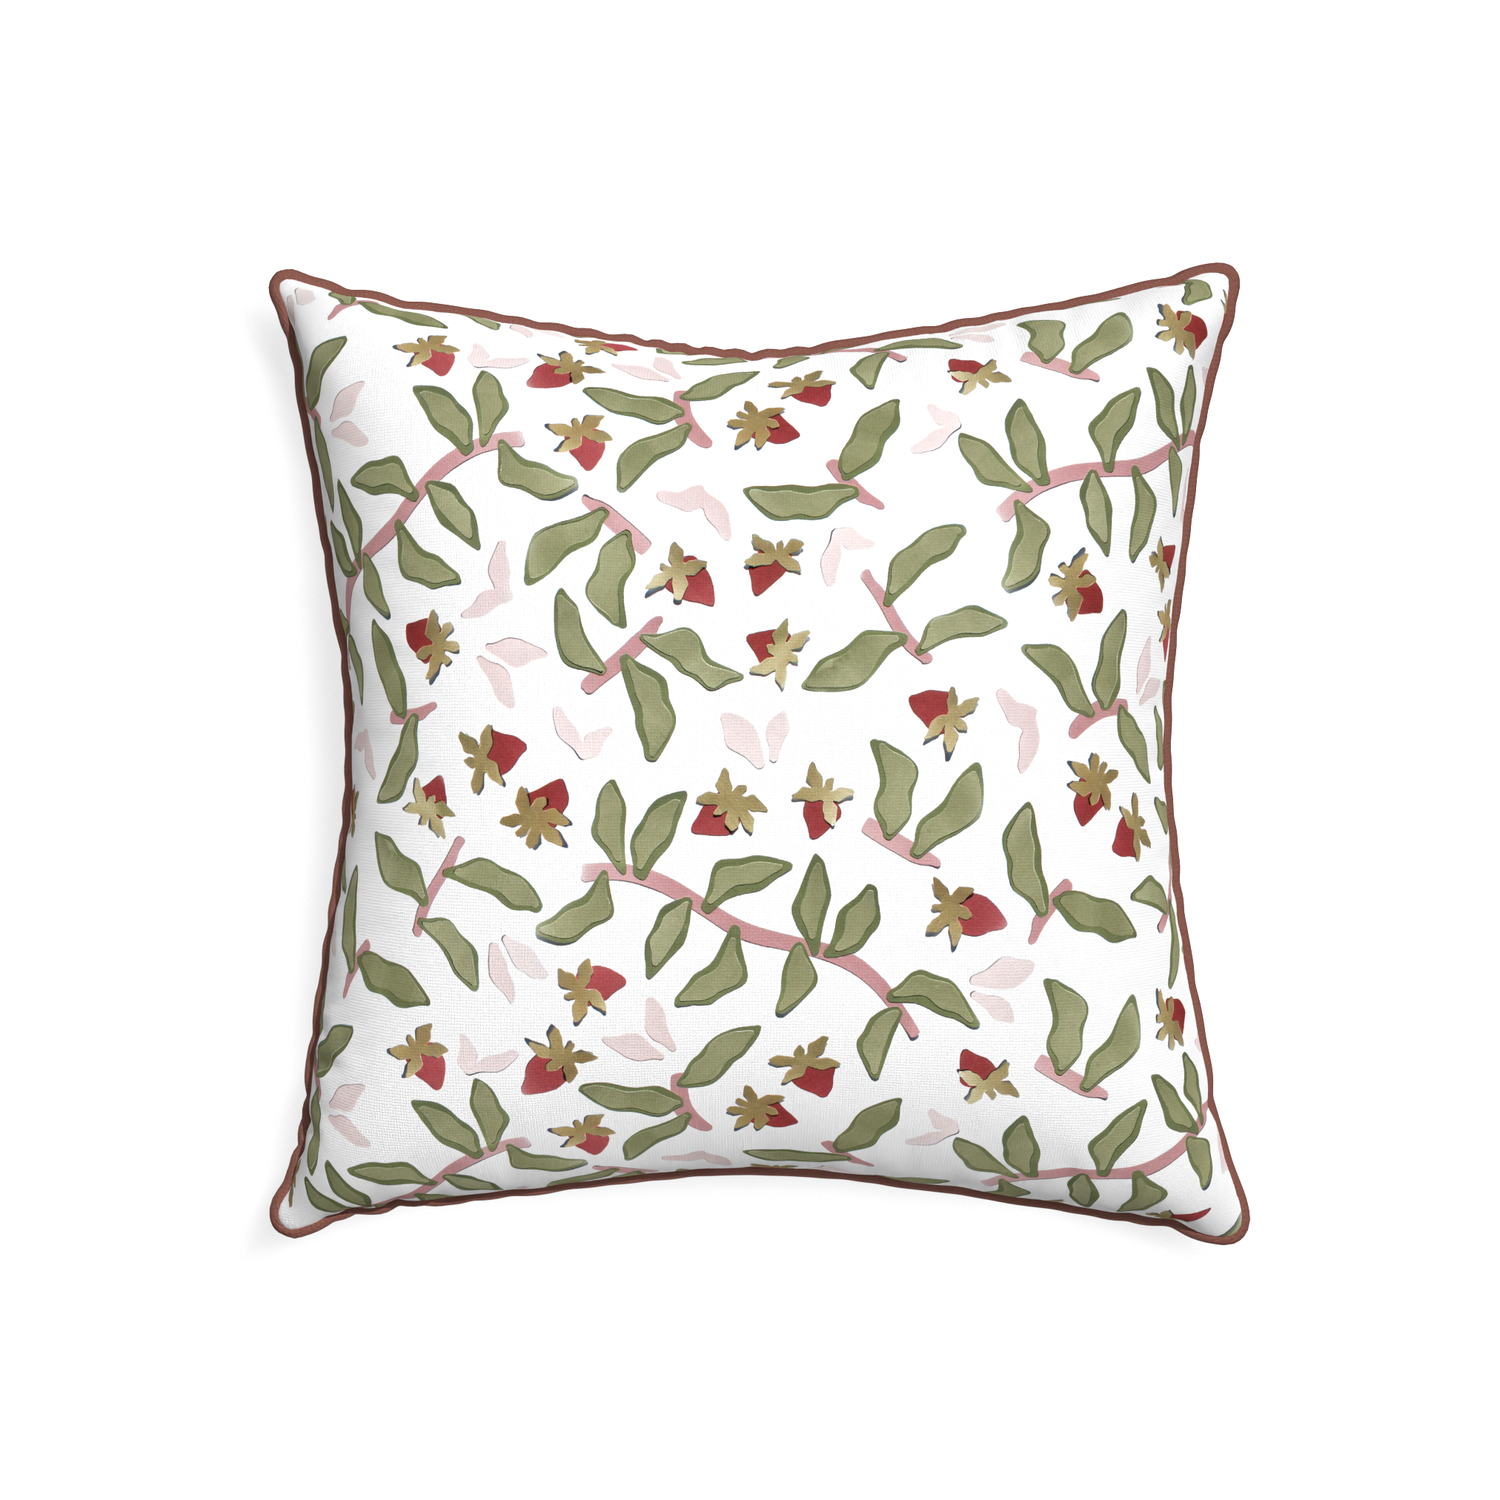 22-square nellie custom strawberry & botanicalpillow with w piping on white background